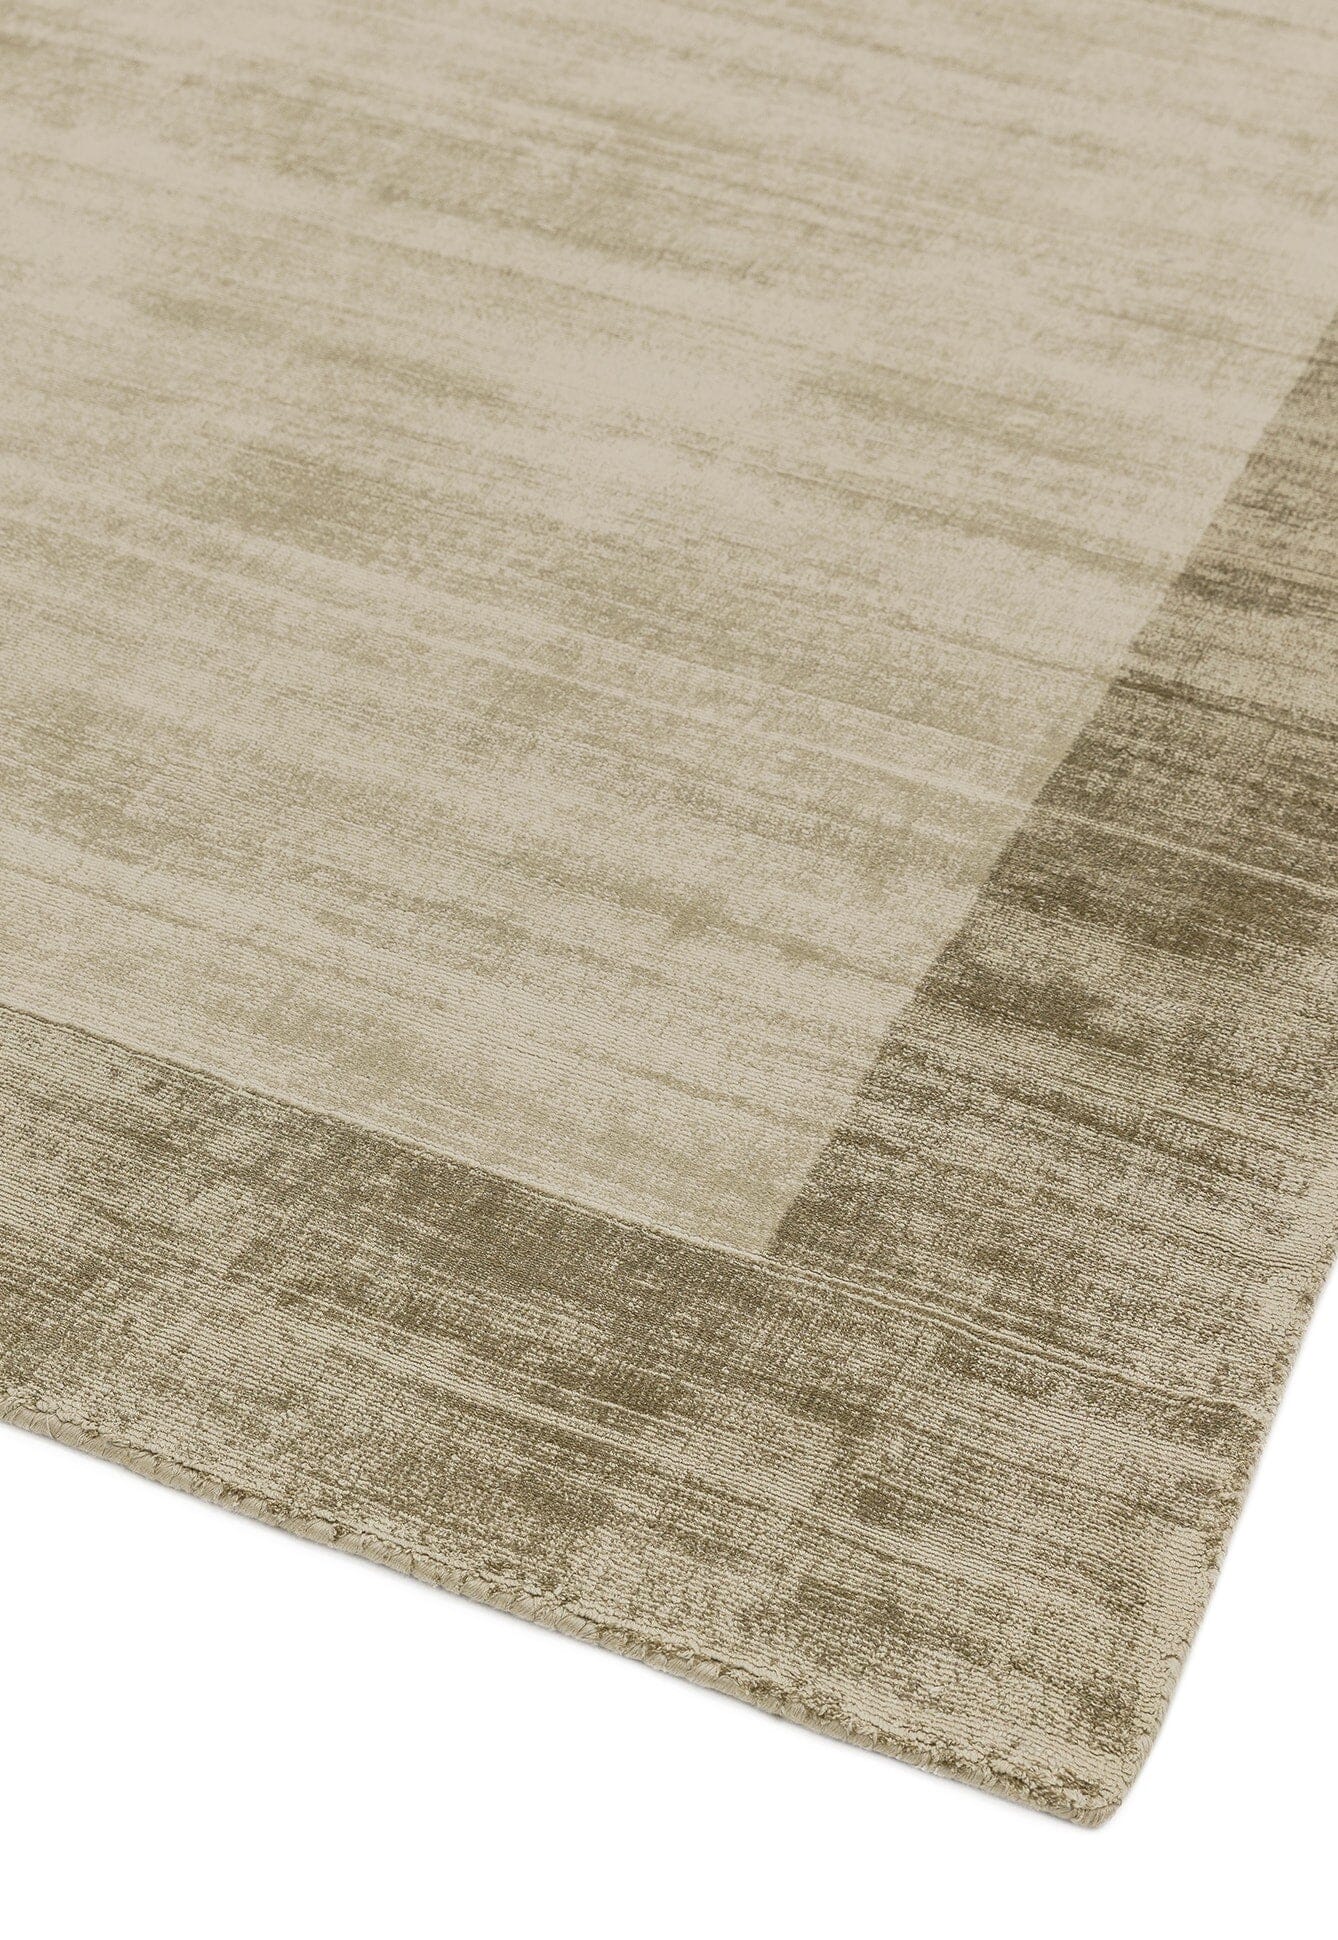  Asiatic Carpets-Asiatic Carpets Blade Hand Woven Rug Smoke Putty - 200 x 290cm-Grey, Silver 445 